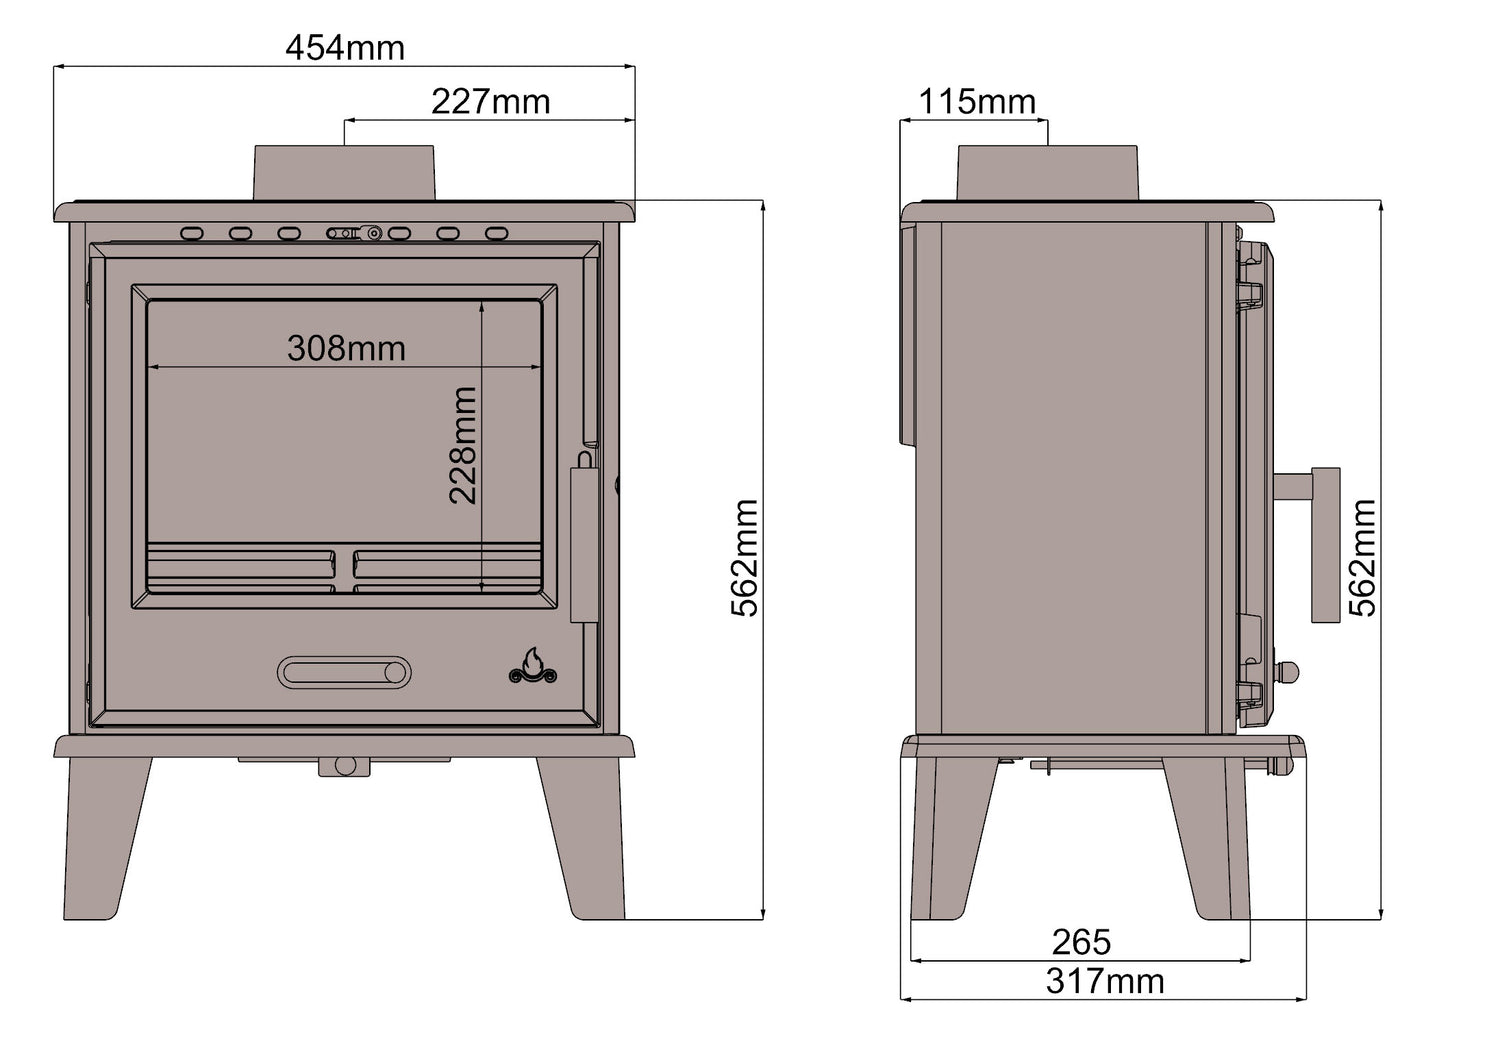 Dimensions and specifications for the Saltfire classic multifuel stove